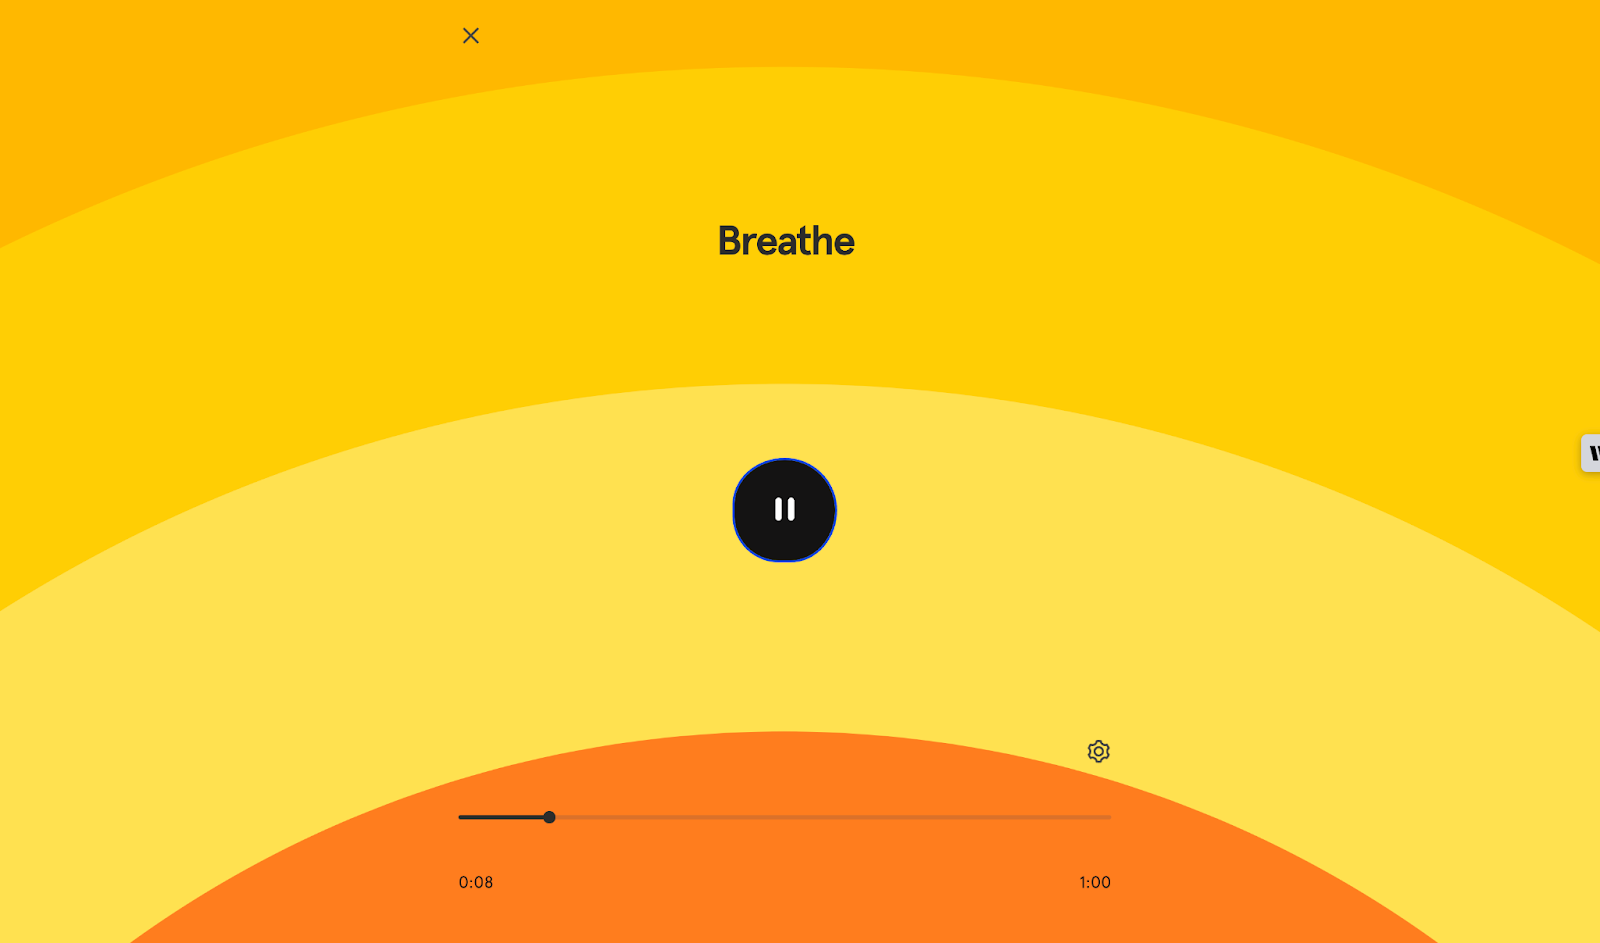 A screenshot of the "Breathe" meditation recording in Headspace, with an orange sunset design.